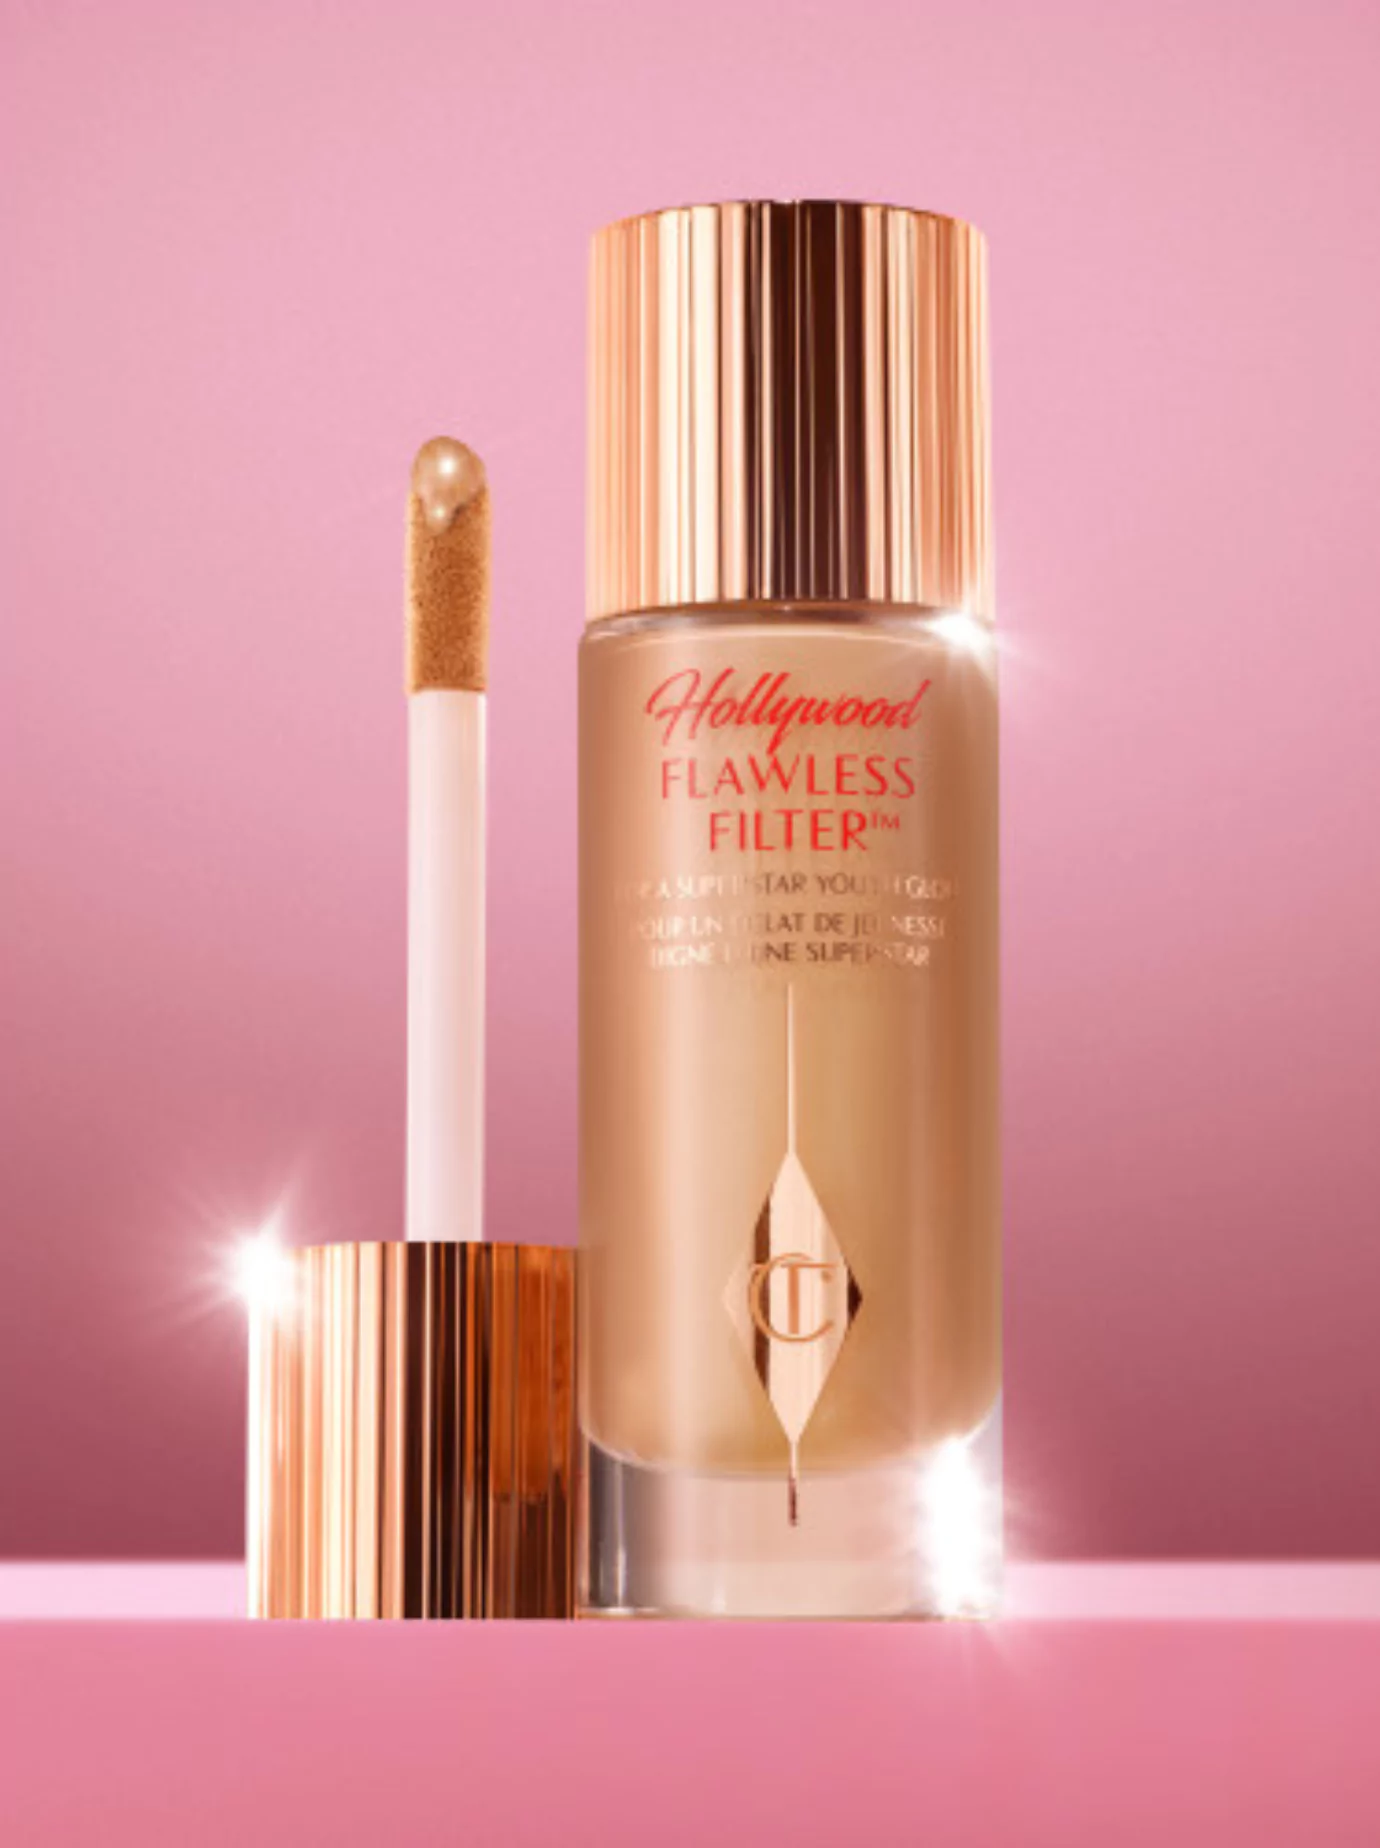 How To Make Foundation Dewy Using Hollywood Flawless Filter